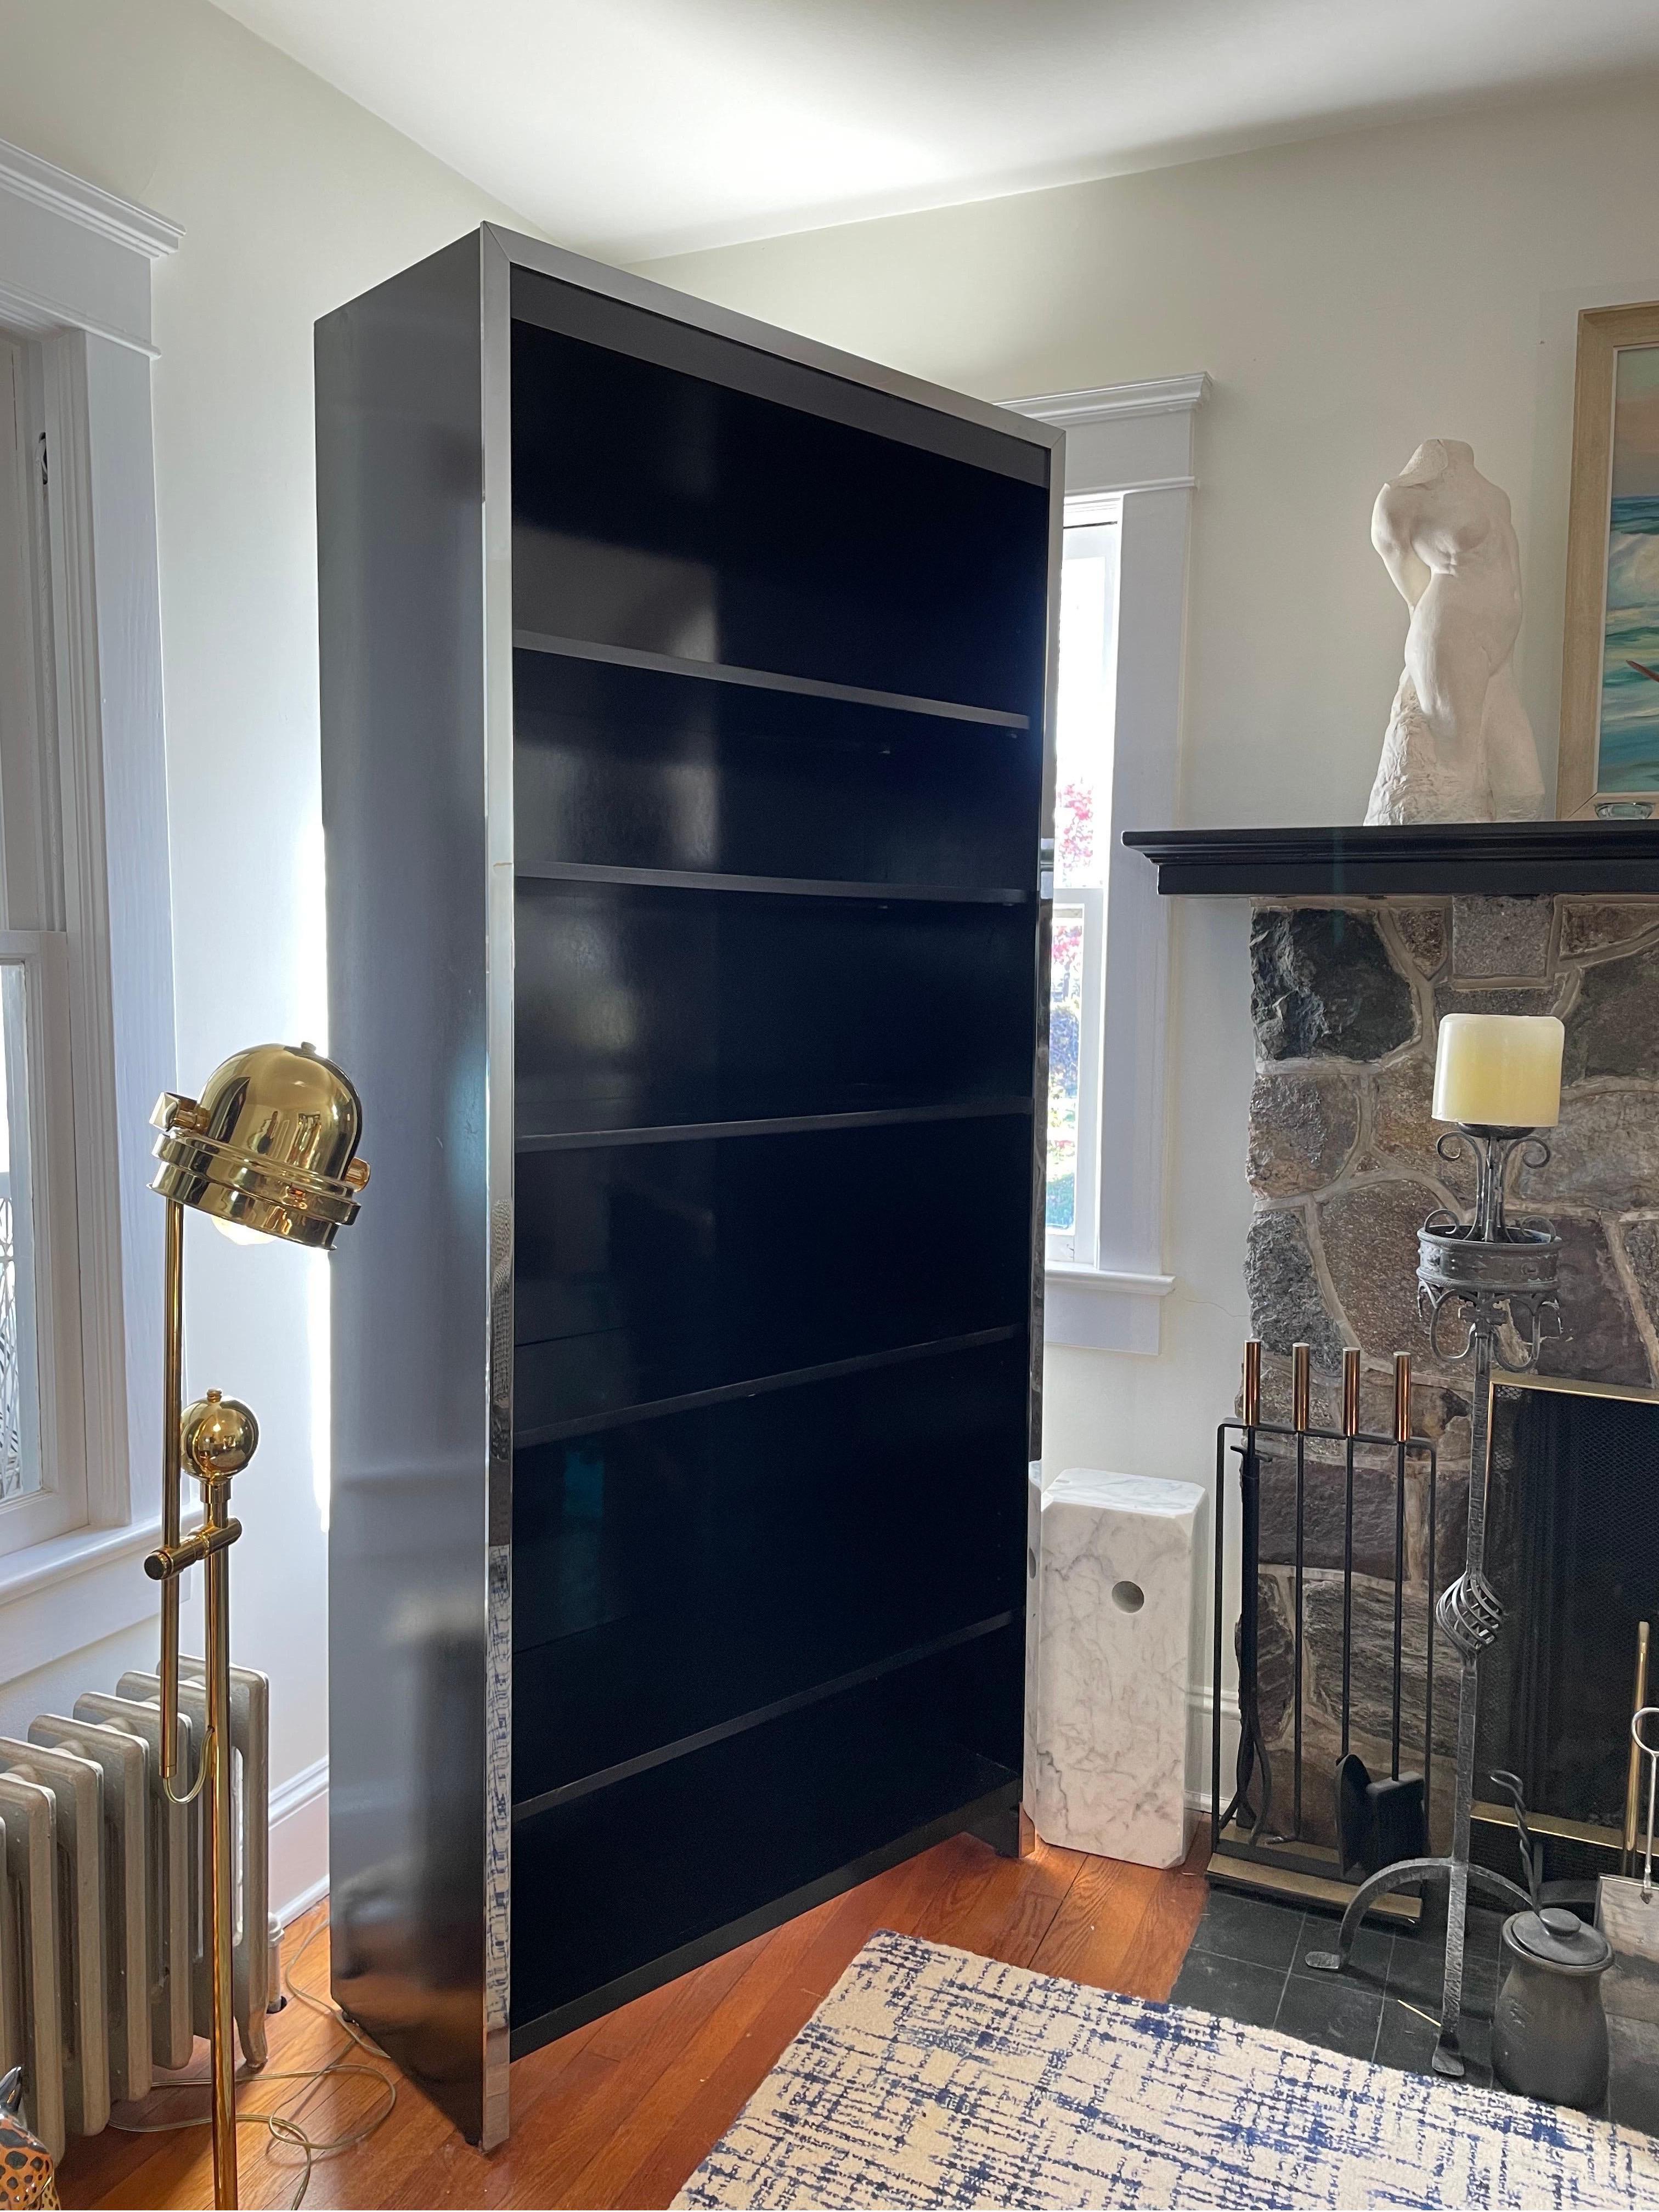 Milo Baughman for John Stuart chrome framed bookcase. Open design with adjustable shelves for versatility.
Curbside to NYC/Philly $300